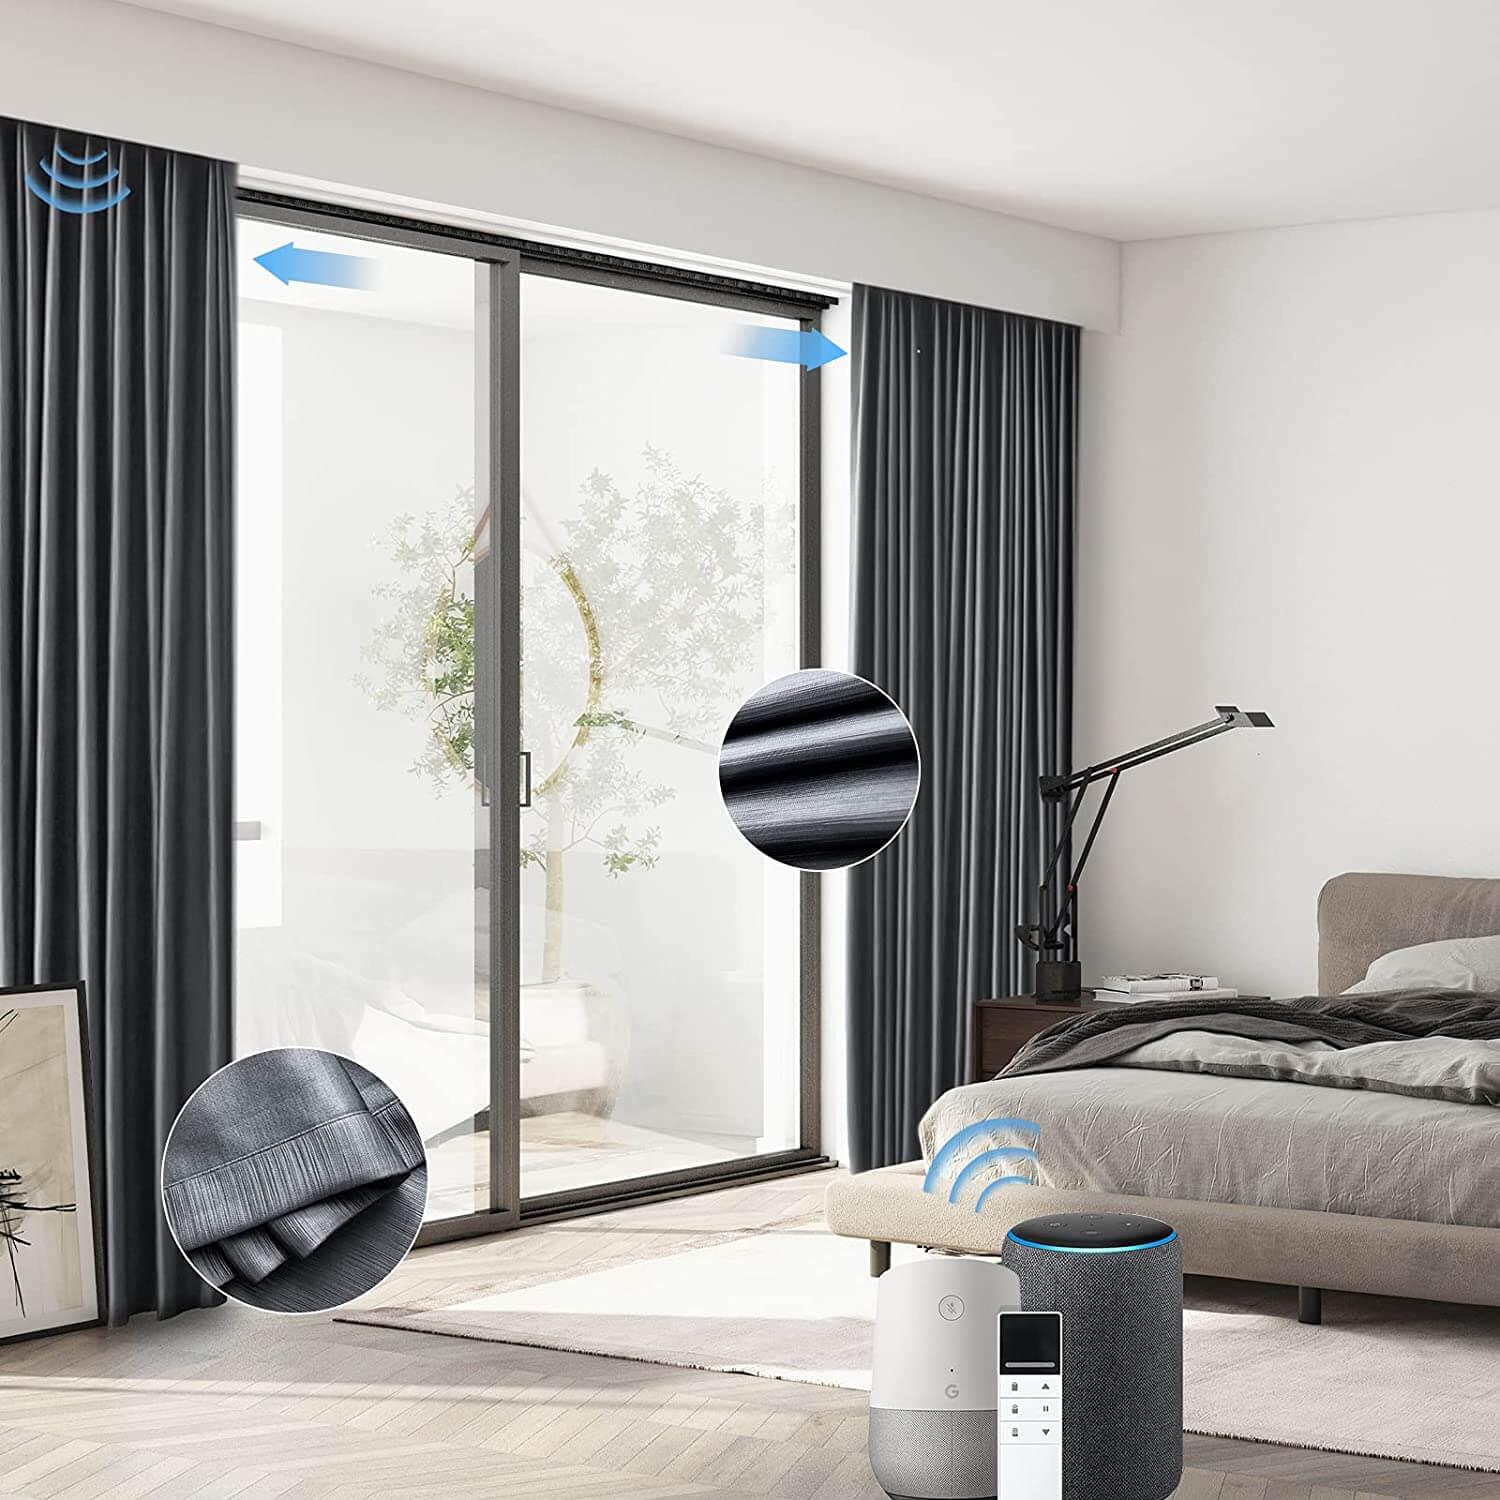 Innovations In Curtain Design: Smart And Sustainable Trends